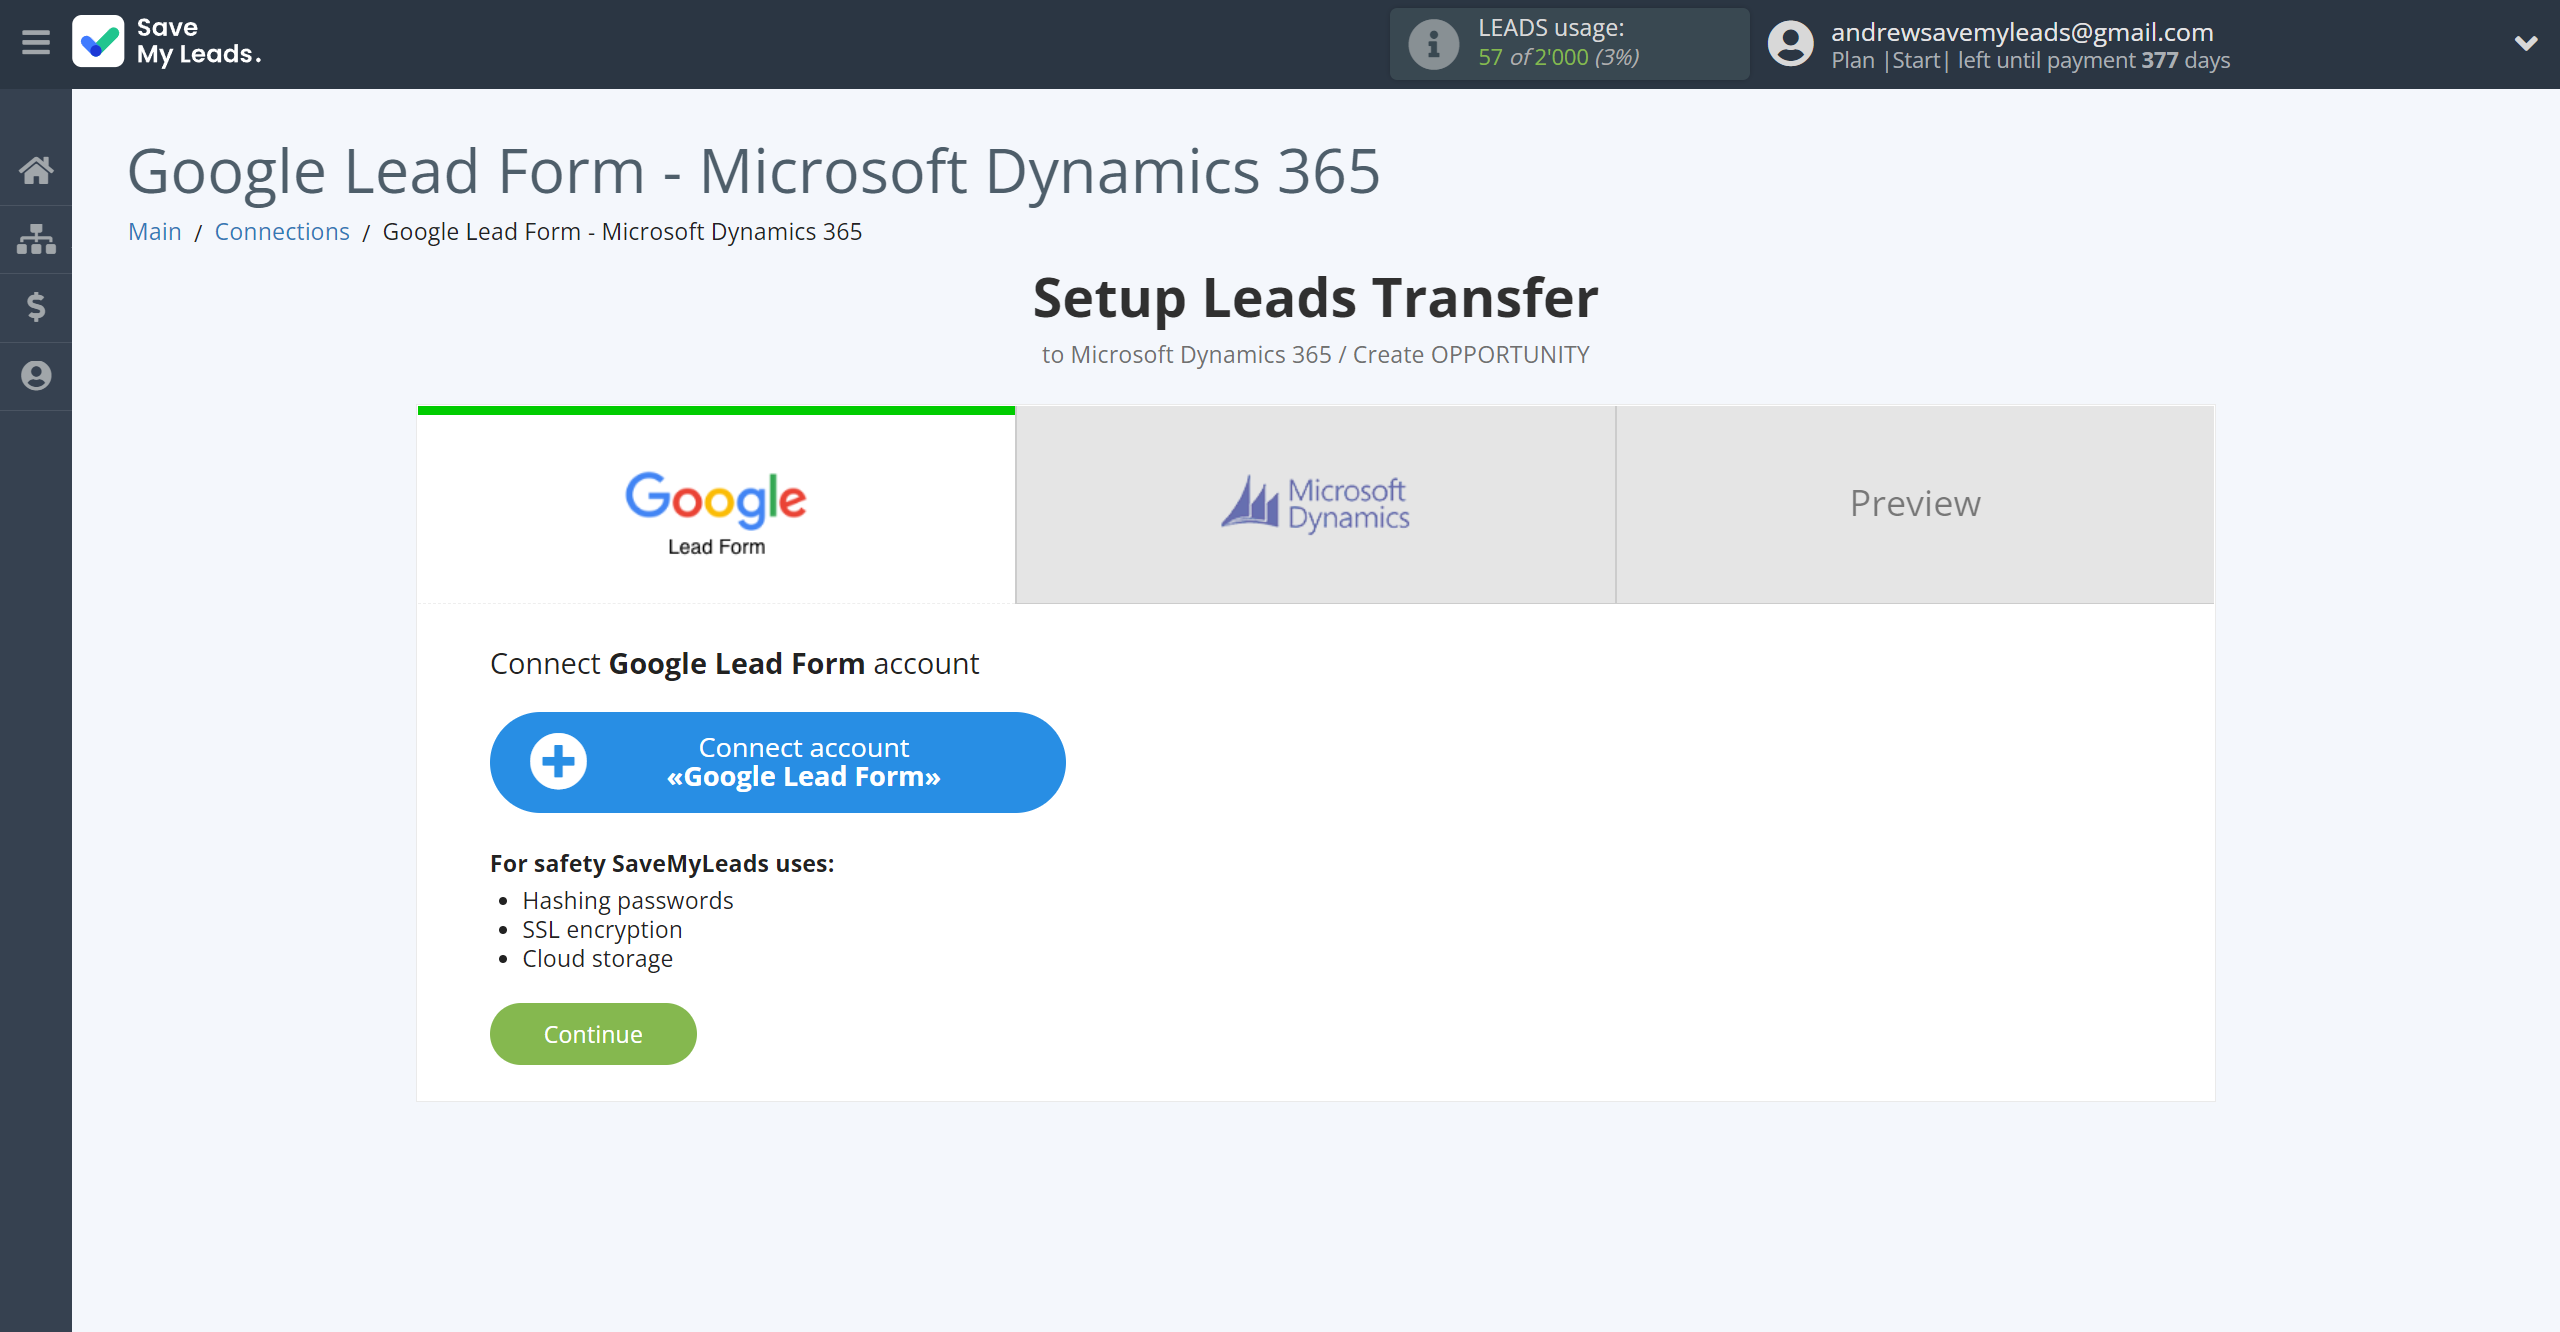 How to Connect Google Lead Form with Microsoft Dynamics 365 Create Opportunity | Data Source account